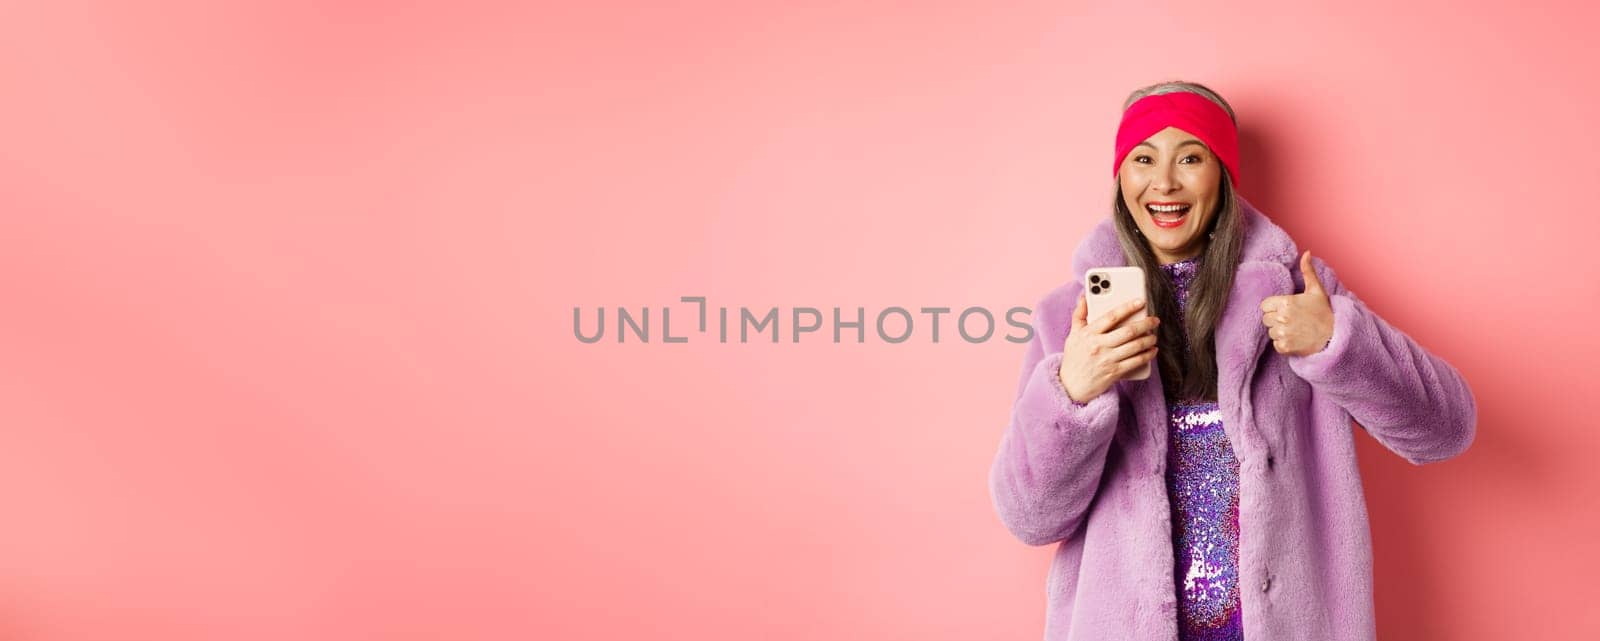 Online shopping and fashion concept. Happy asian grandmother checking out awesome promo, pointing finger at smartphone and looking amazed, pink background.